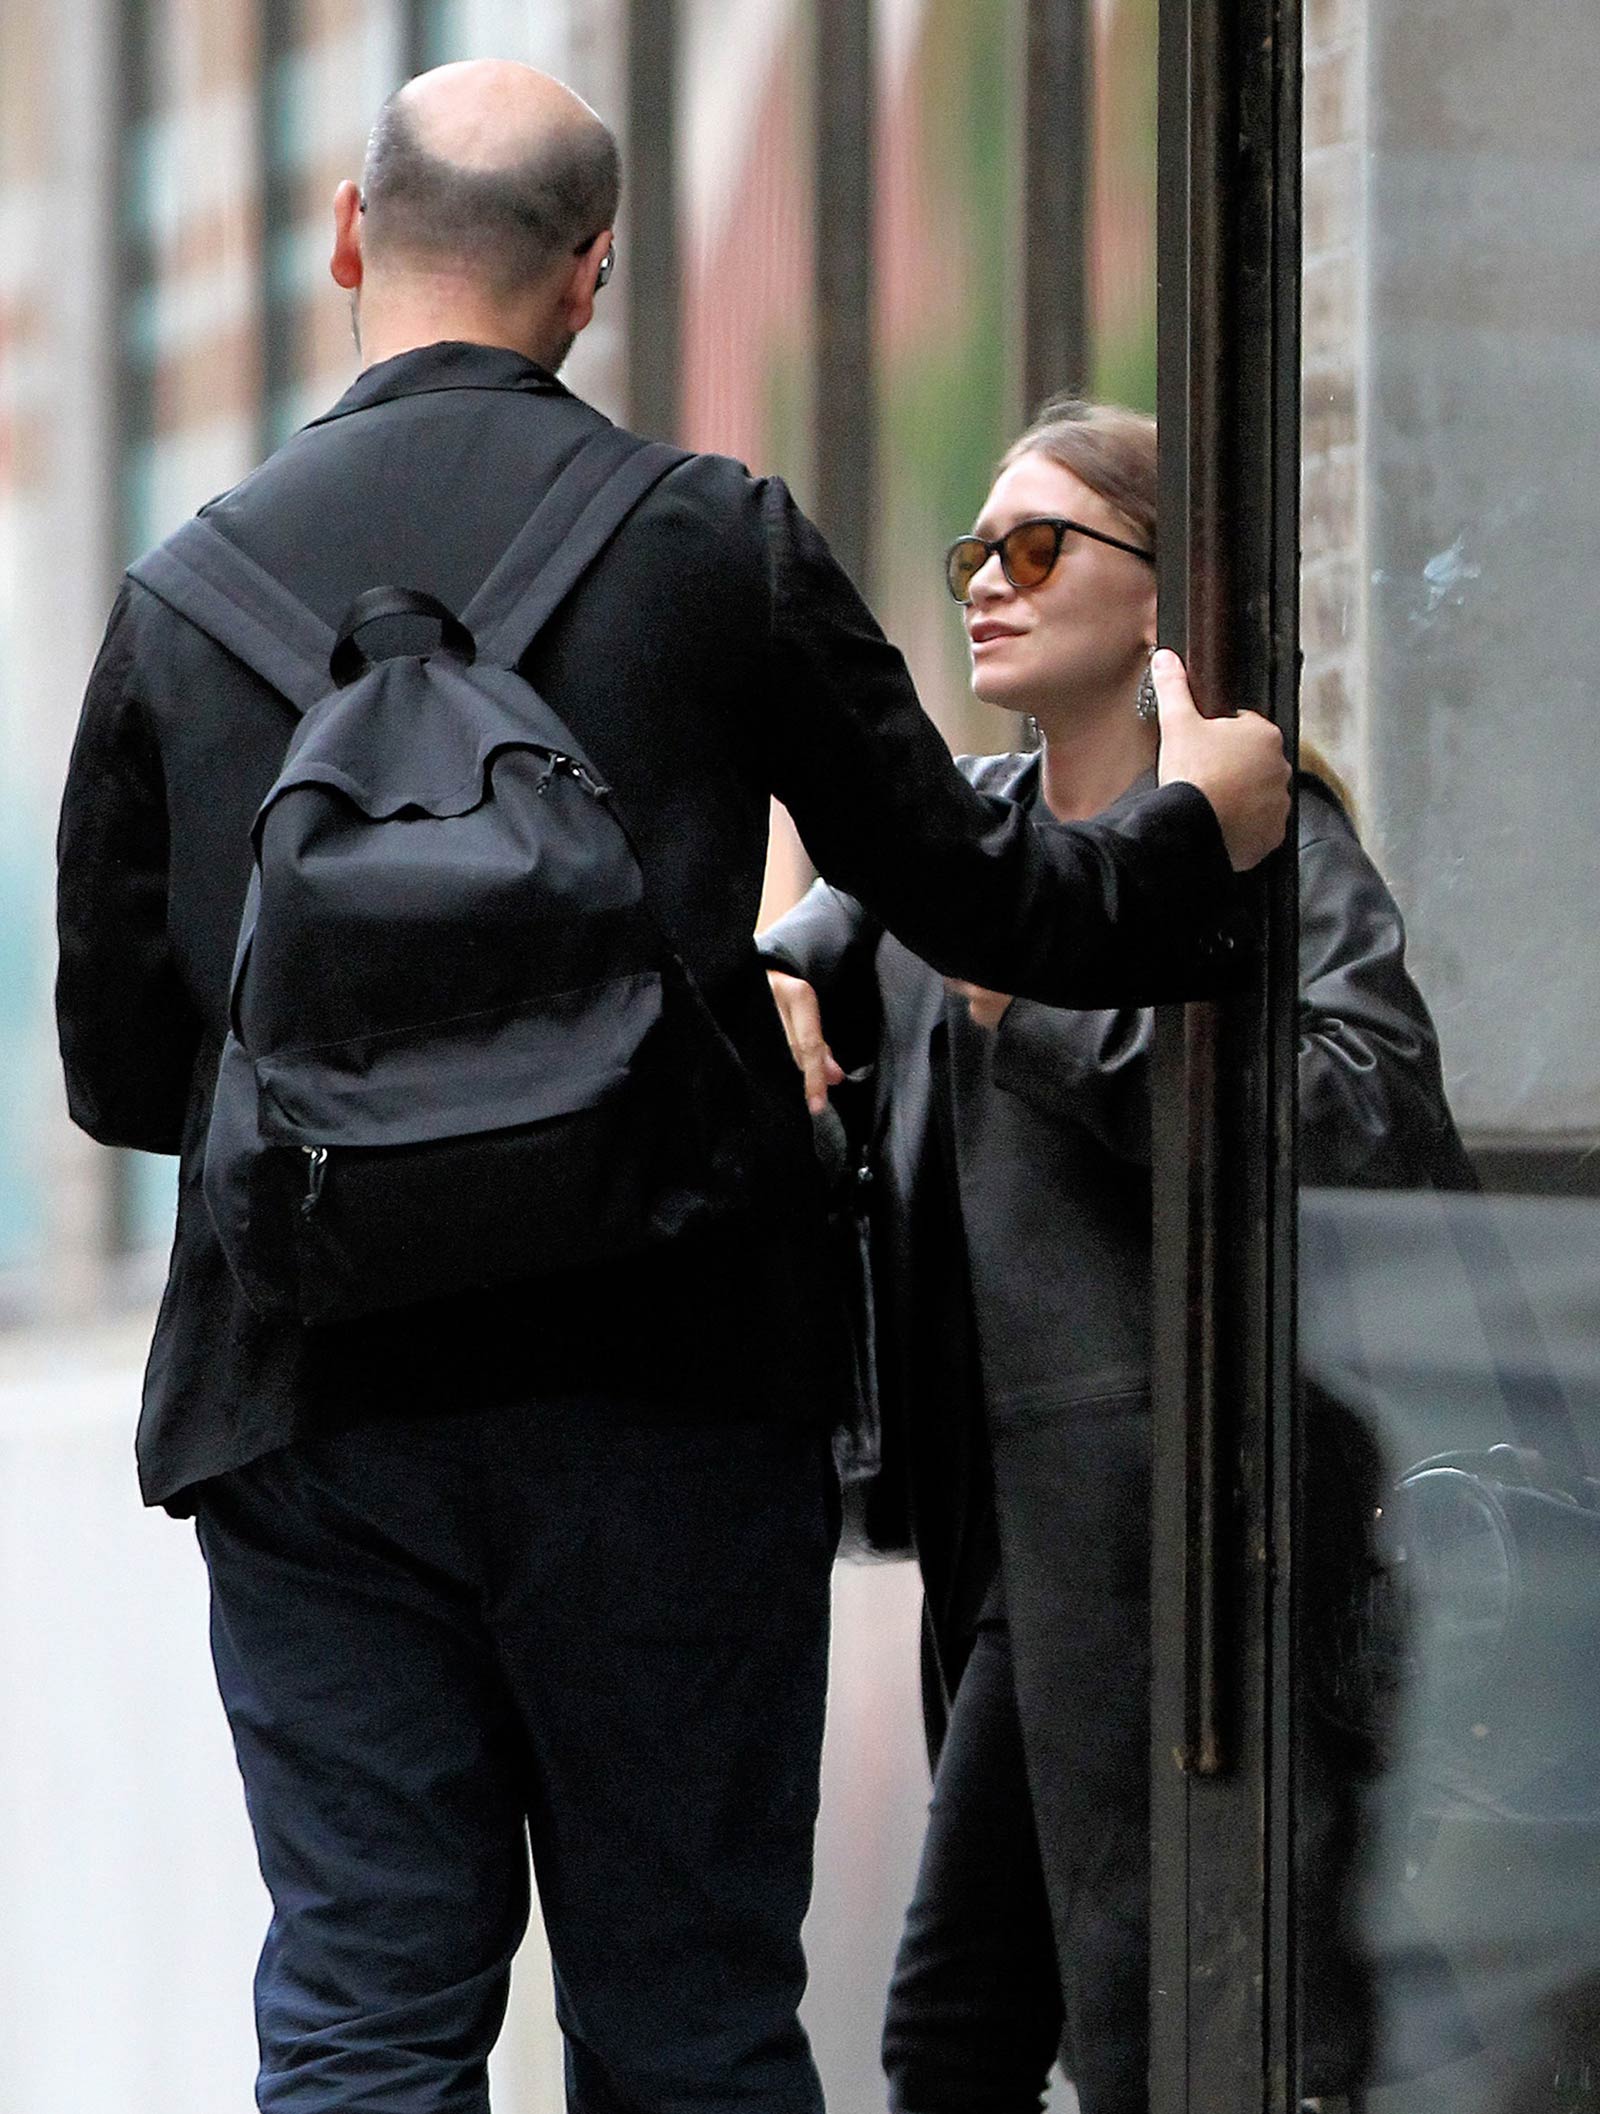 Ashley Olsen out in NYC